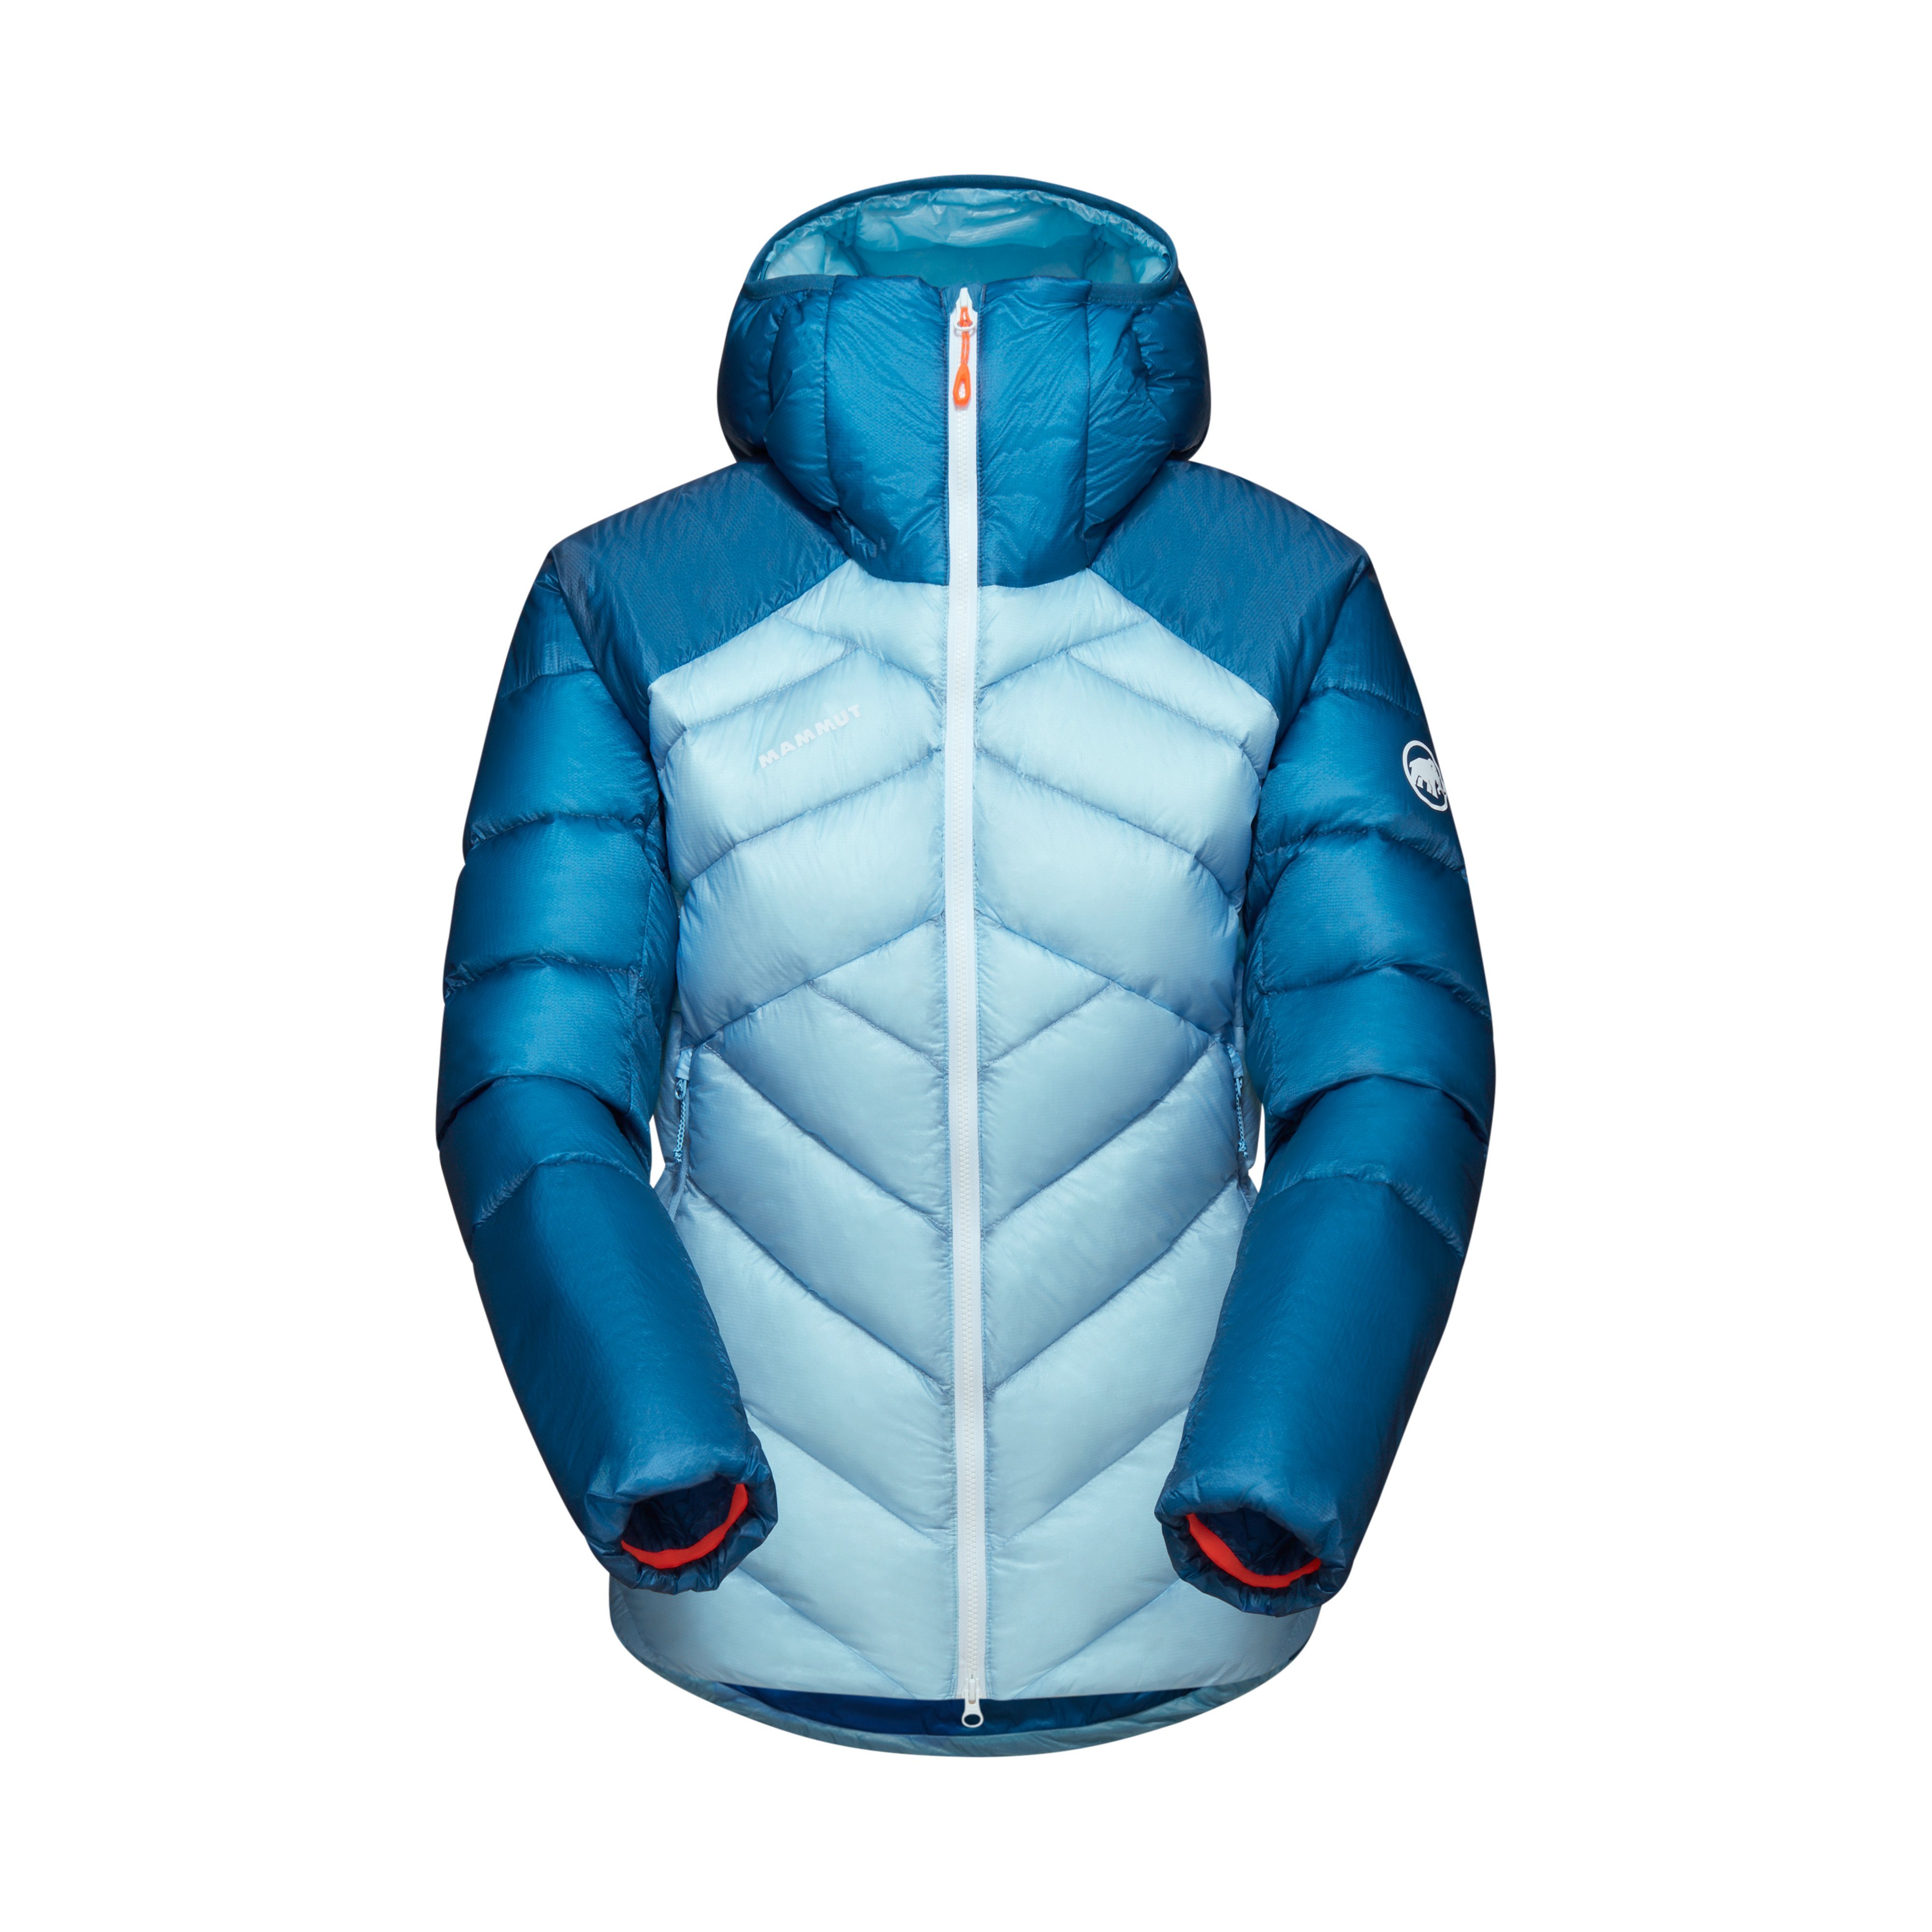 Taiss IN Hooded Jacket Women - cool blue-deep ice, XS thumbnail